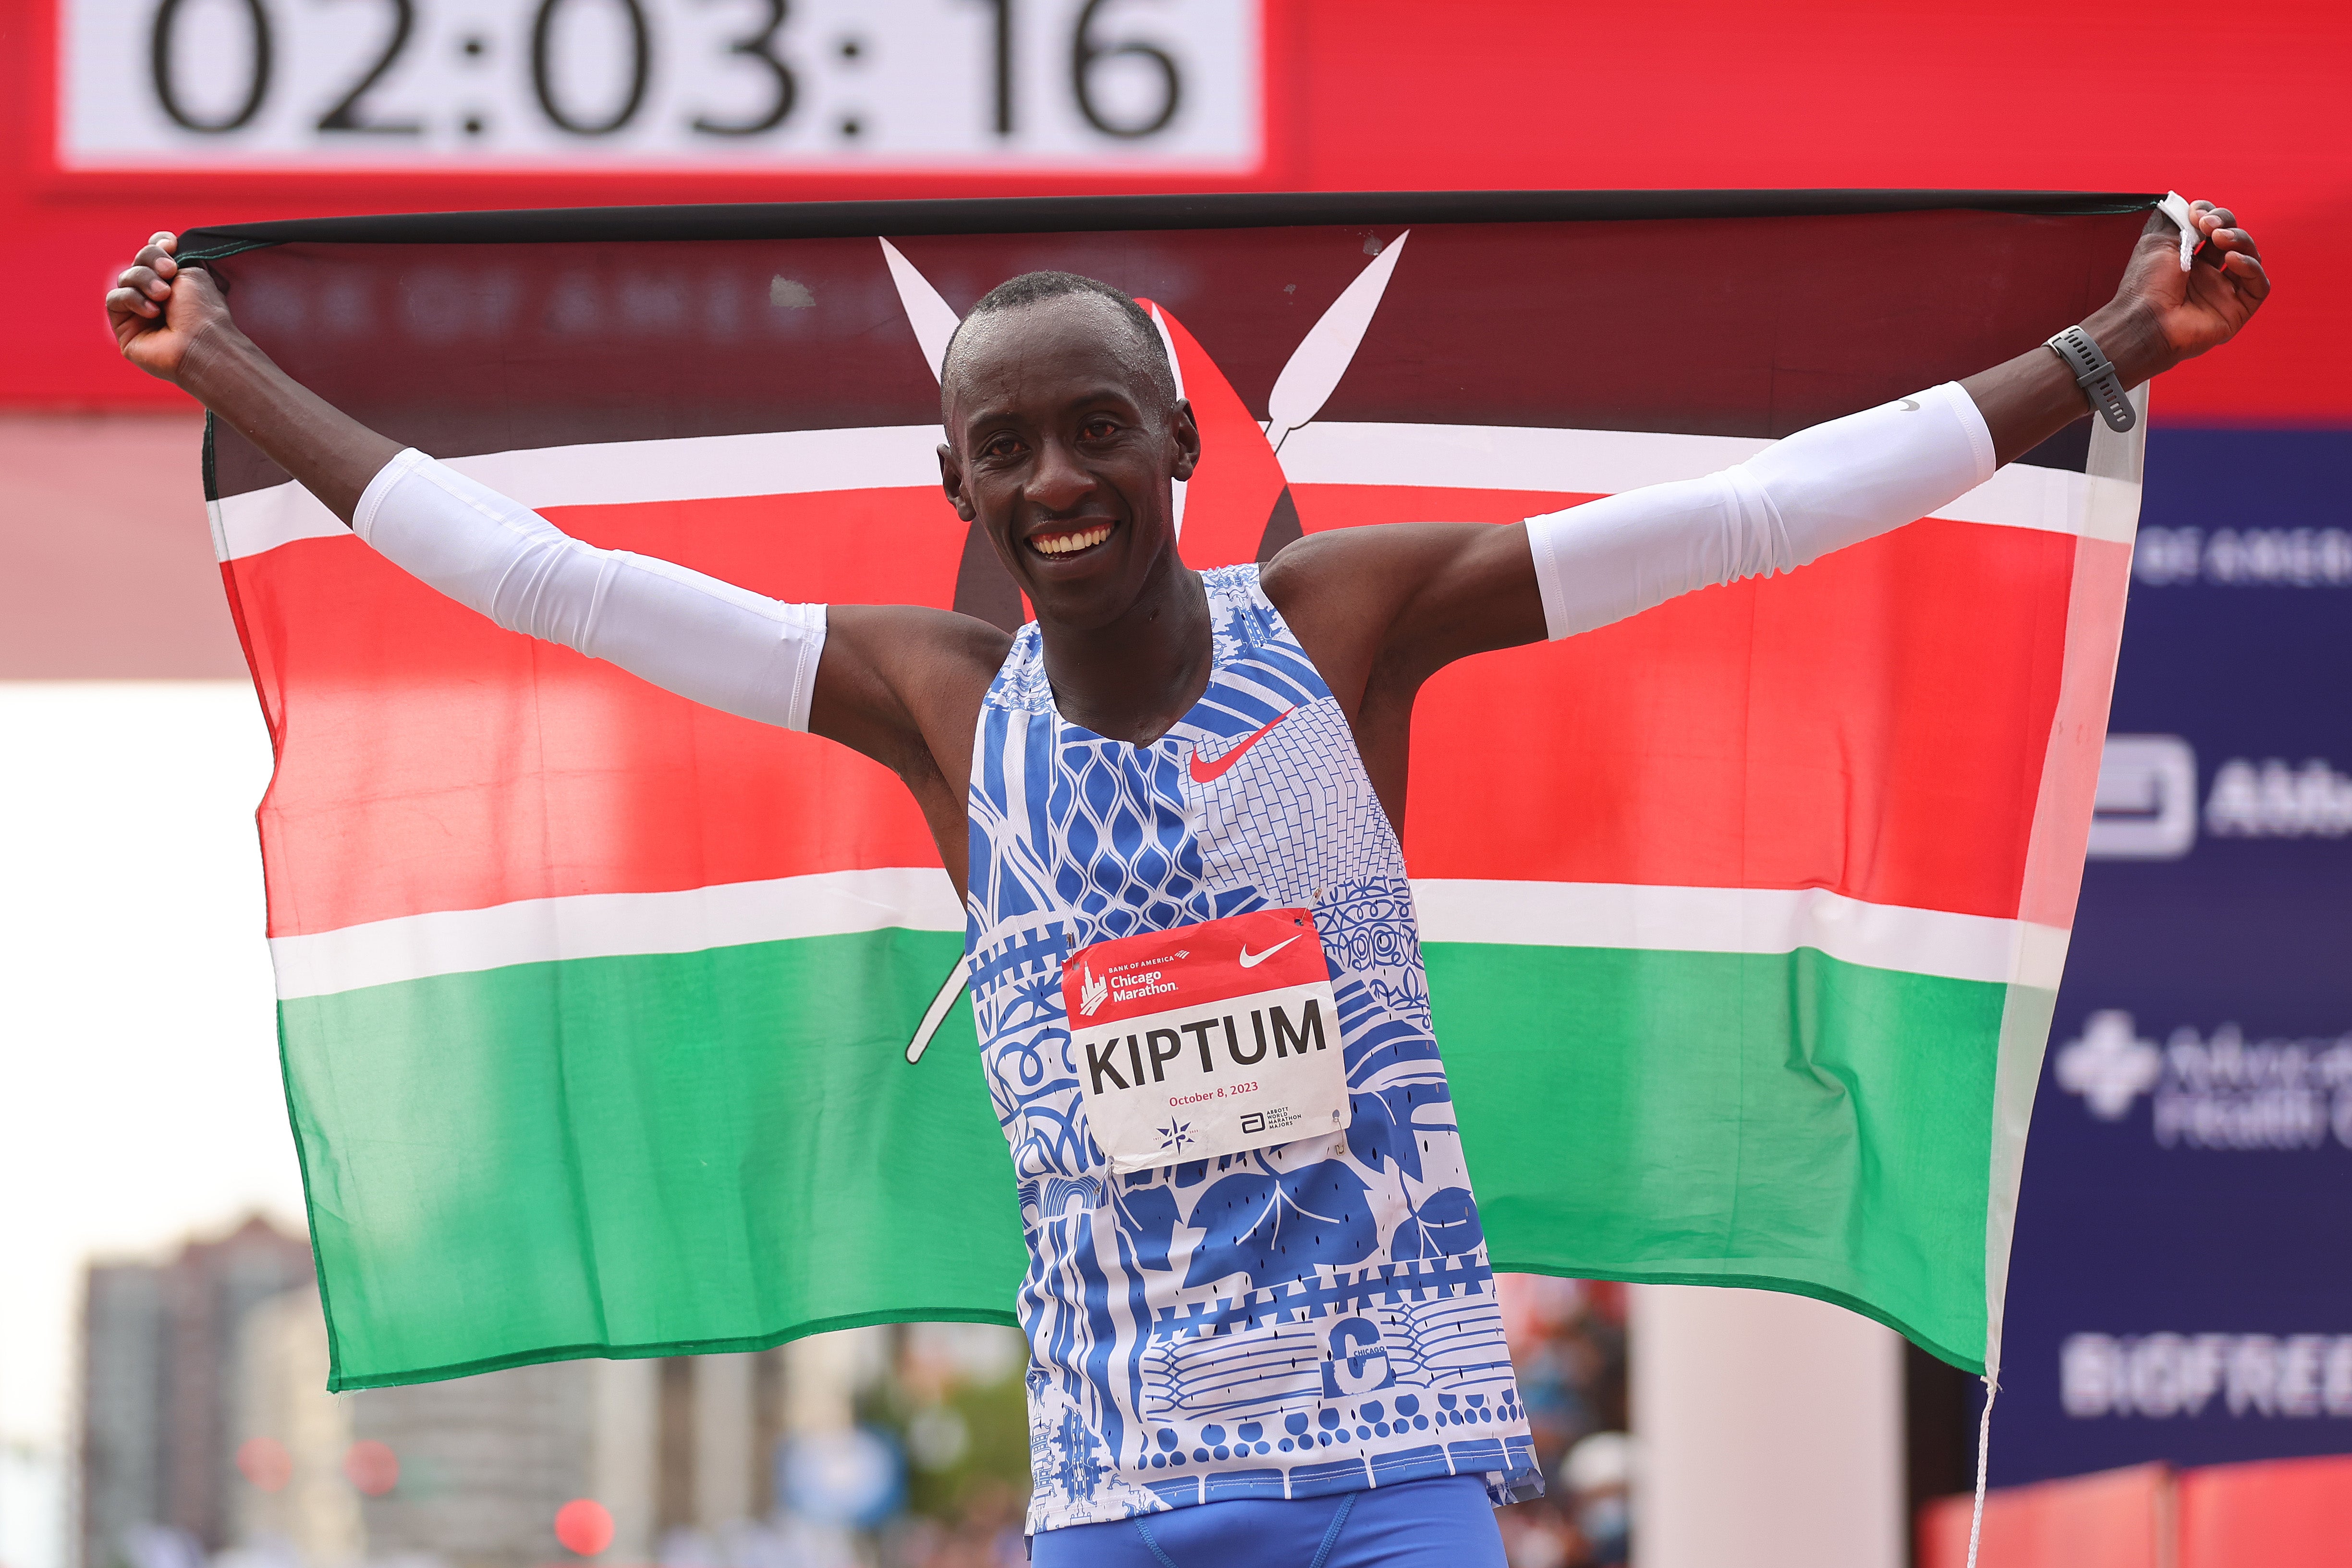 Kiptum smashed the great Kipchoge’s marathon record in Chicago